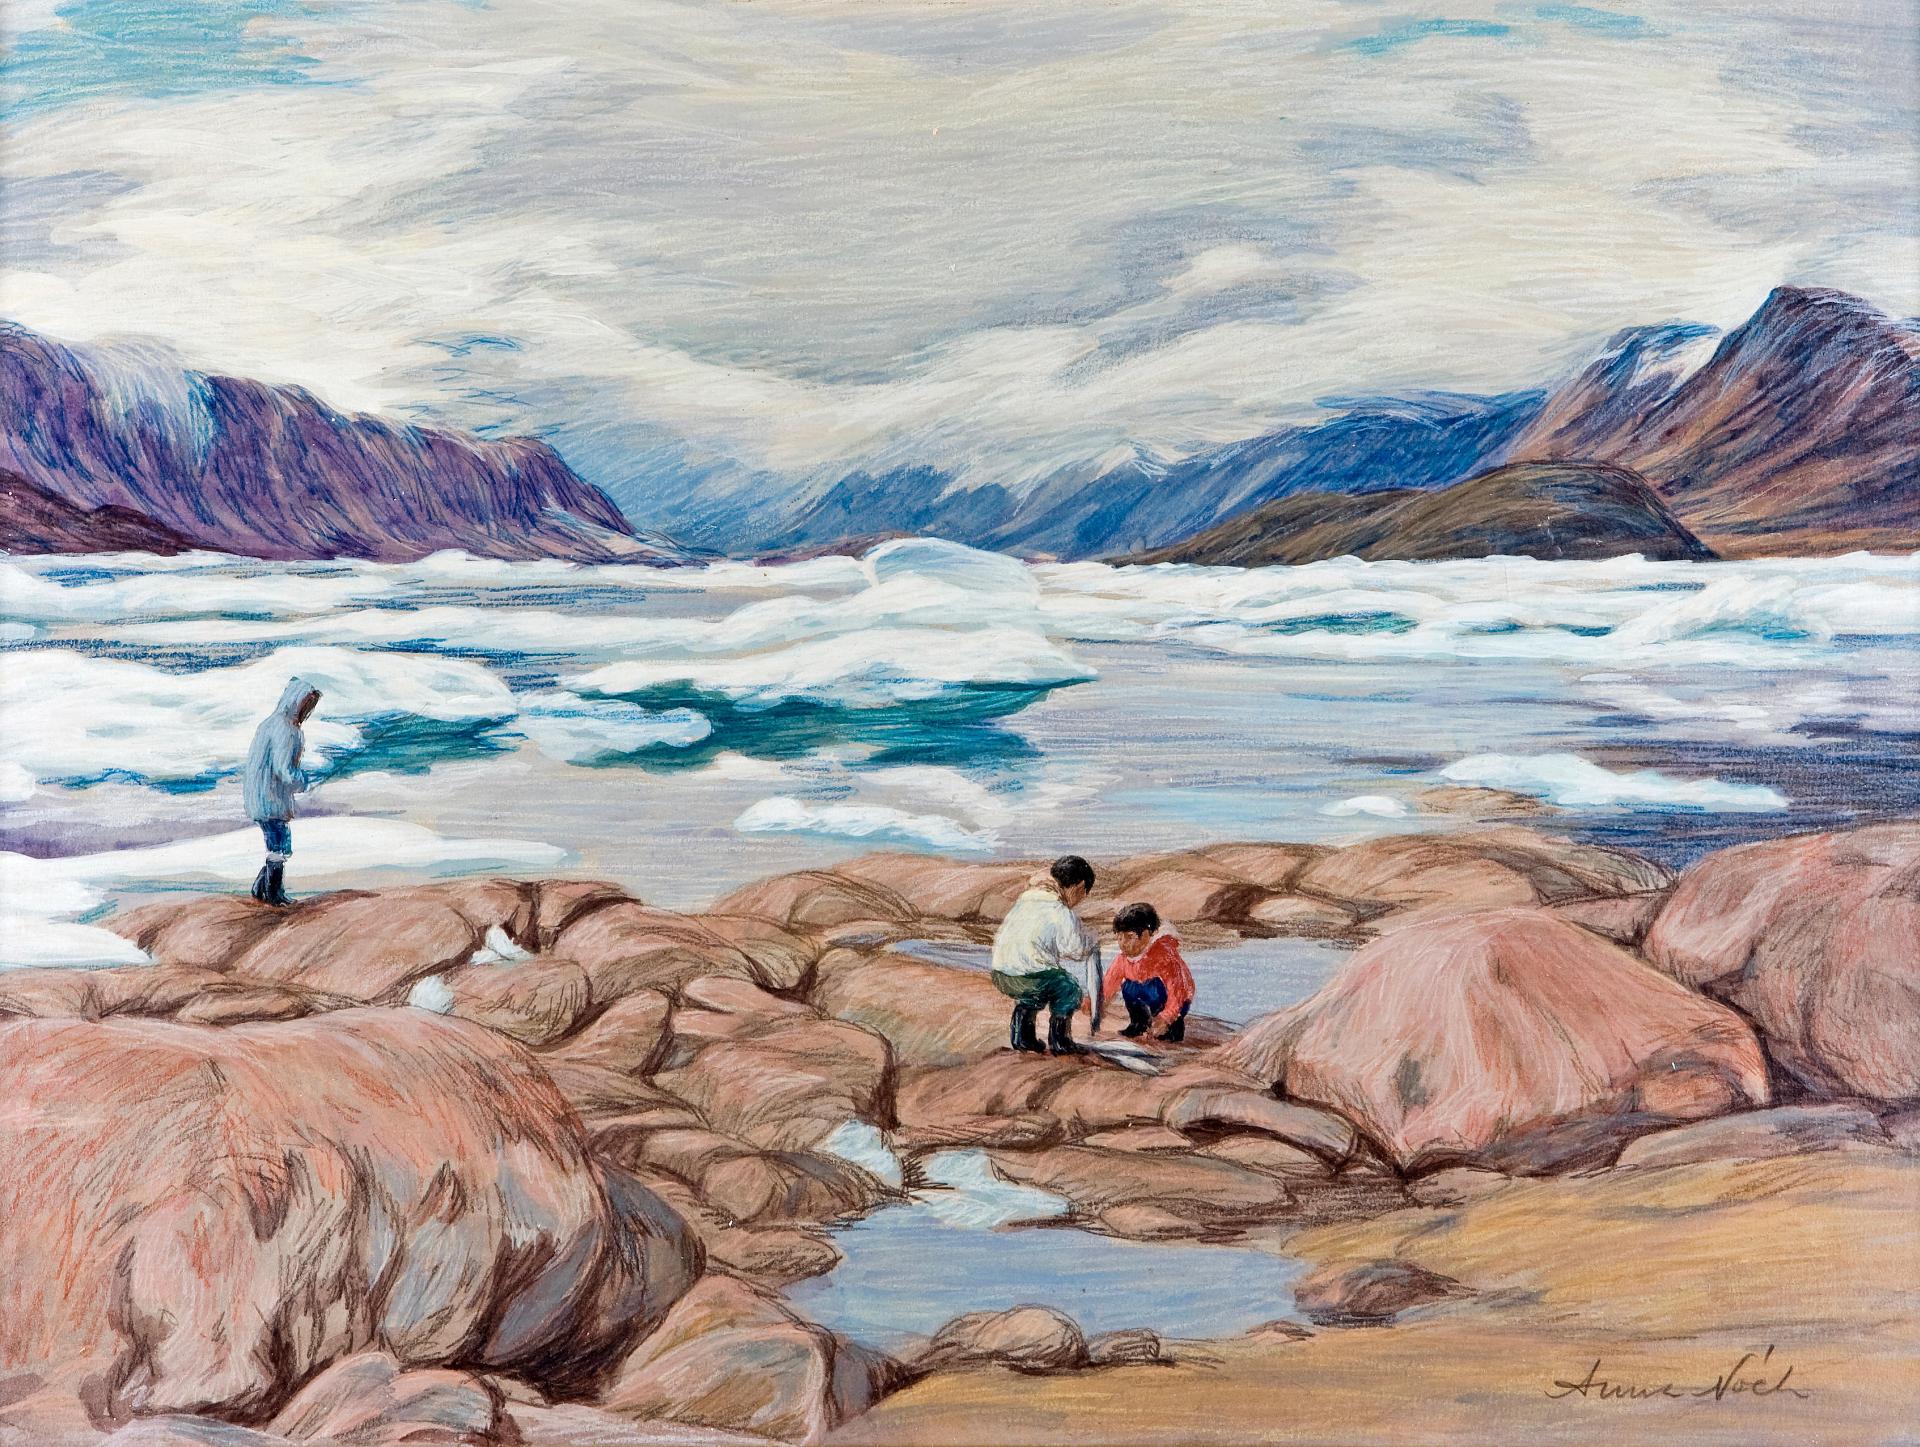 Anna T. Noeh (1926-2016) - After the storm in Pangnirtung